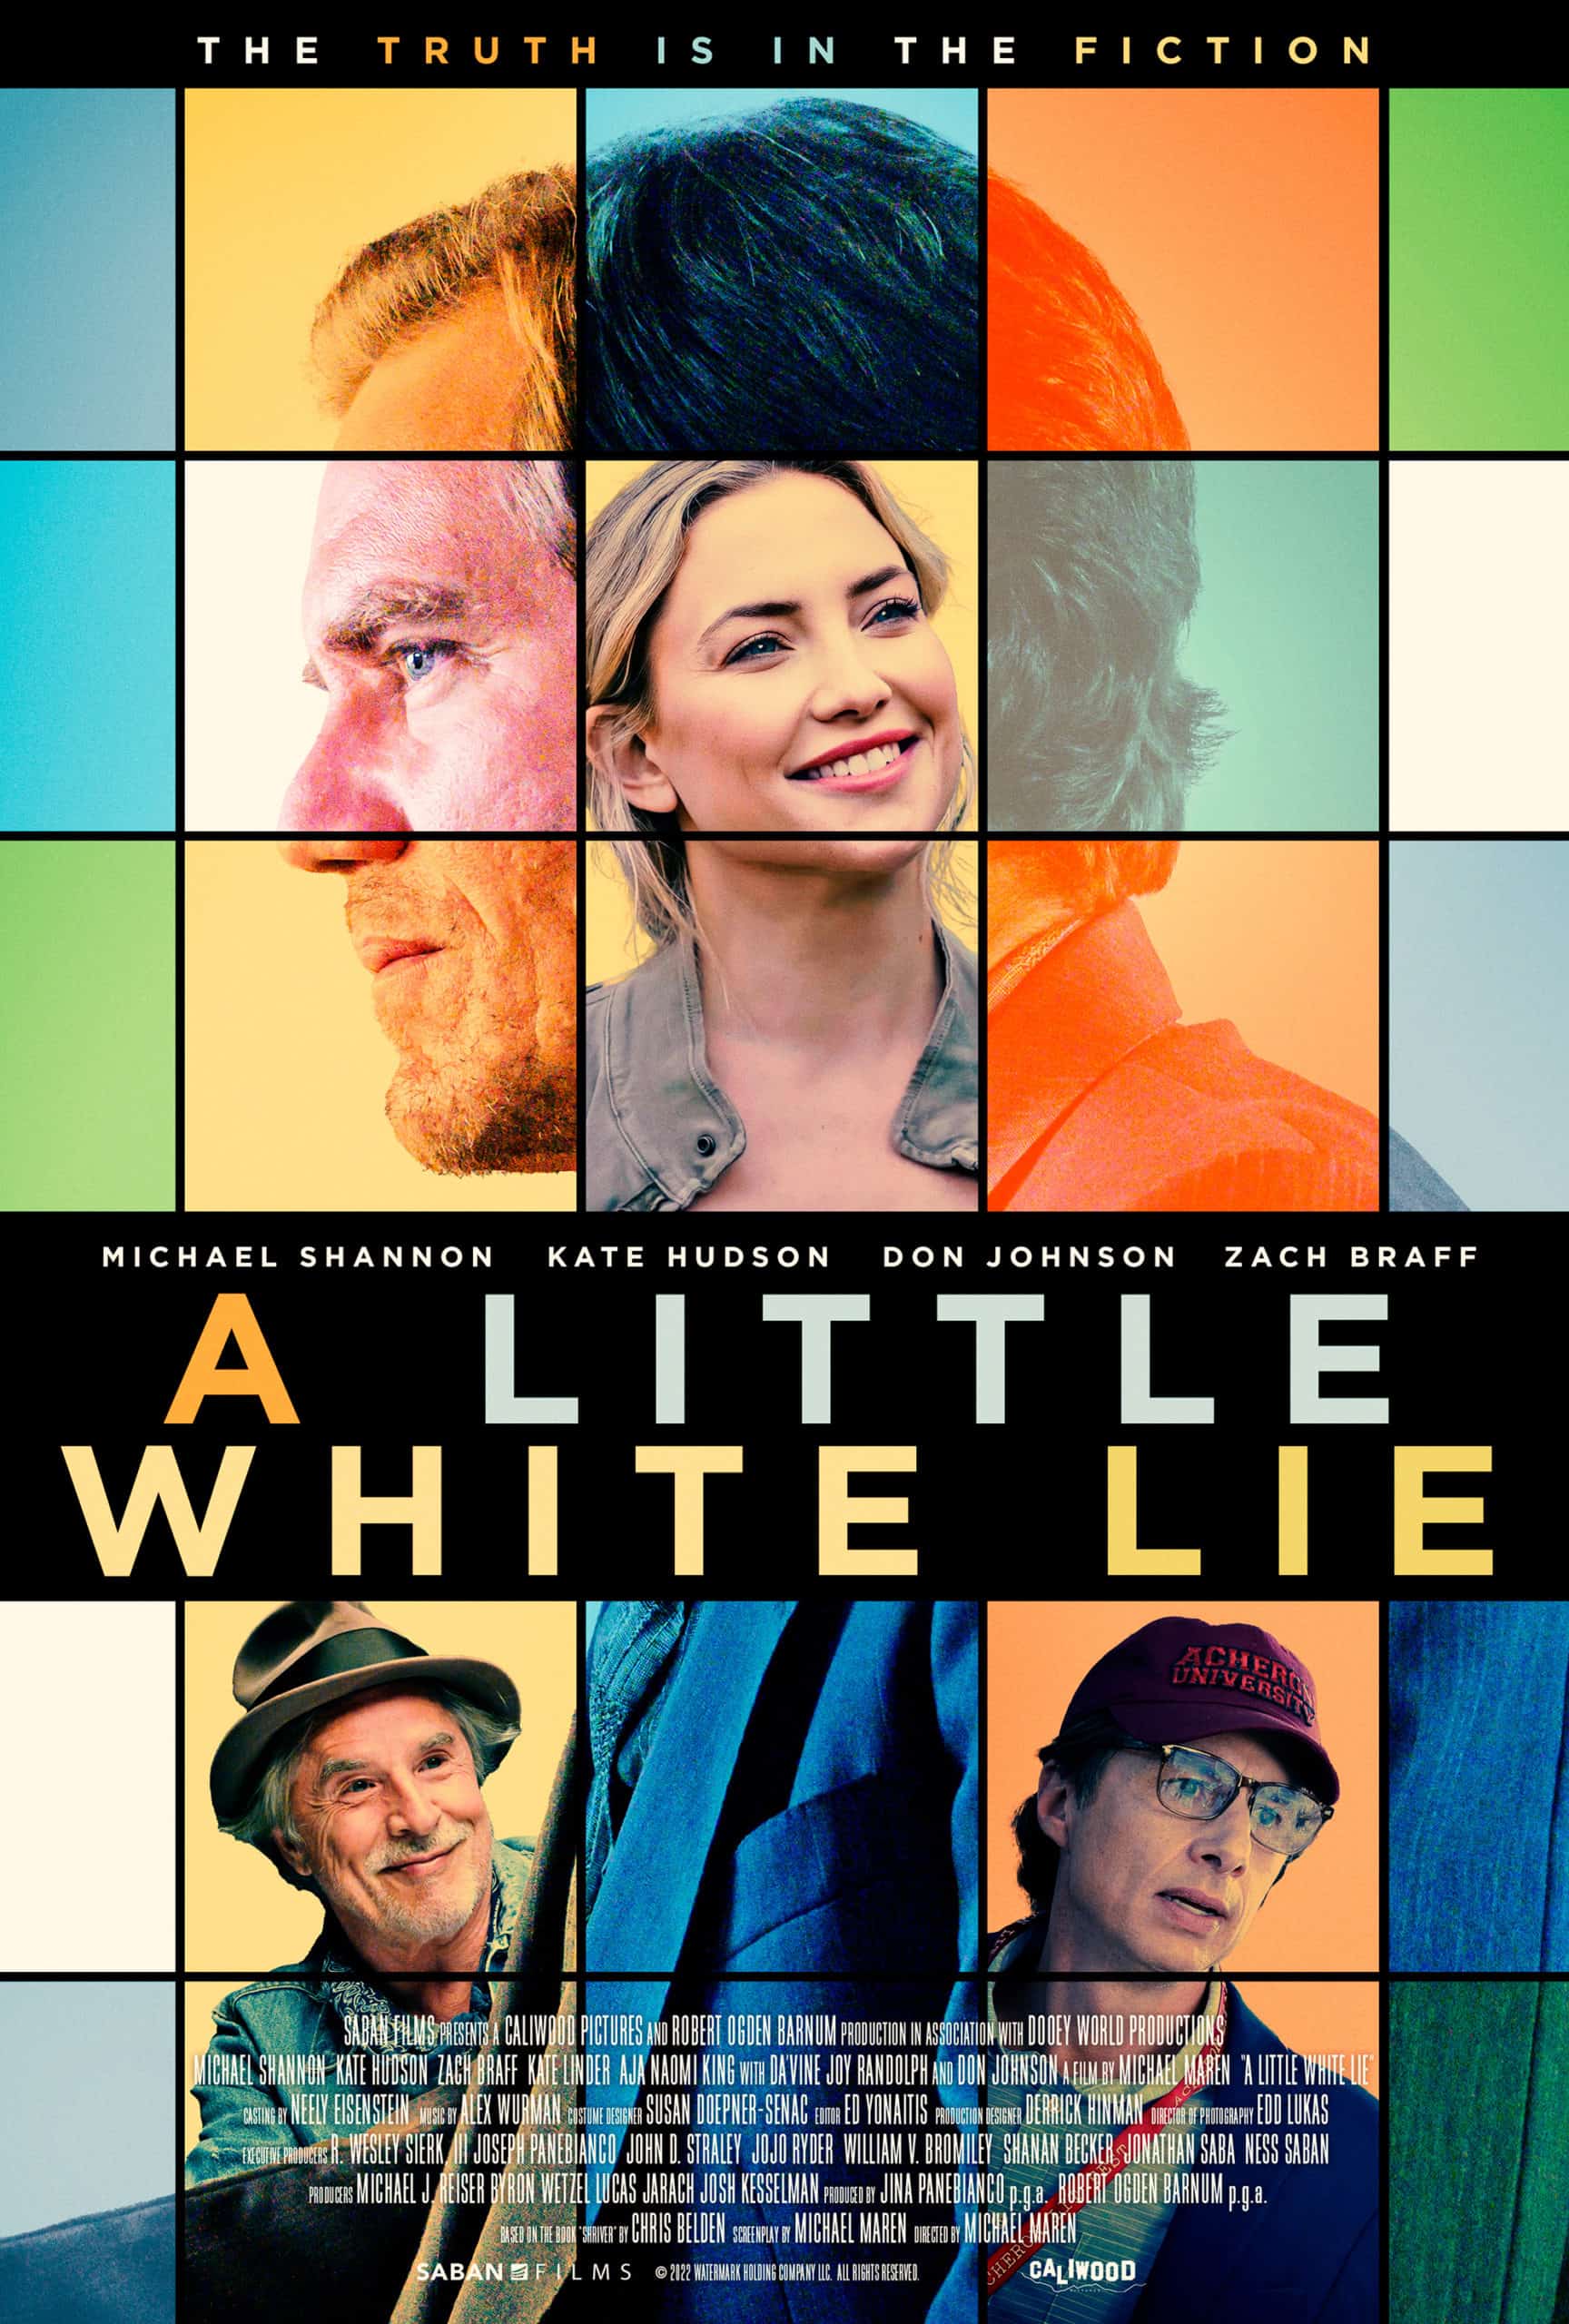 A Little White Lie lands a trailer and poster - IN THEATERS and VOD March 3rd 43